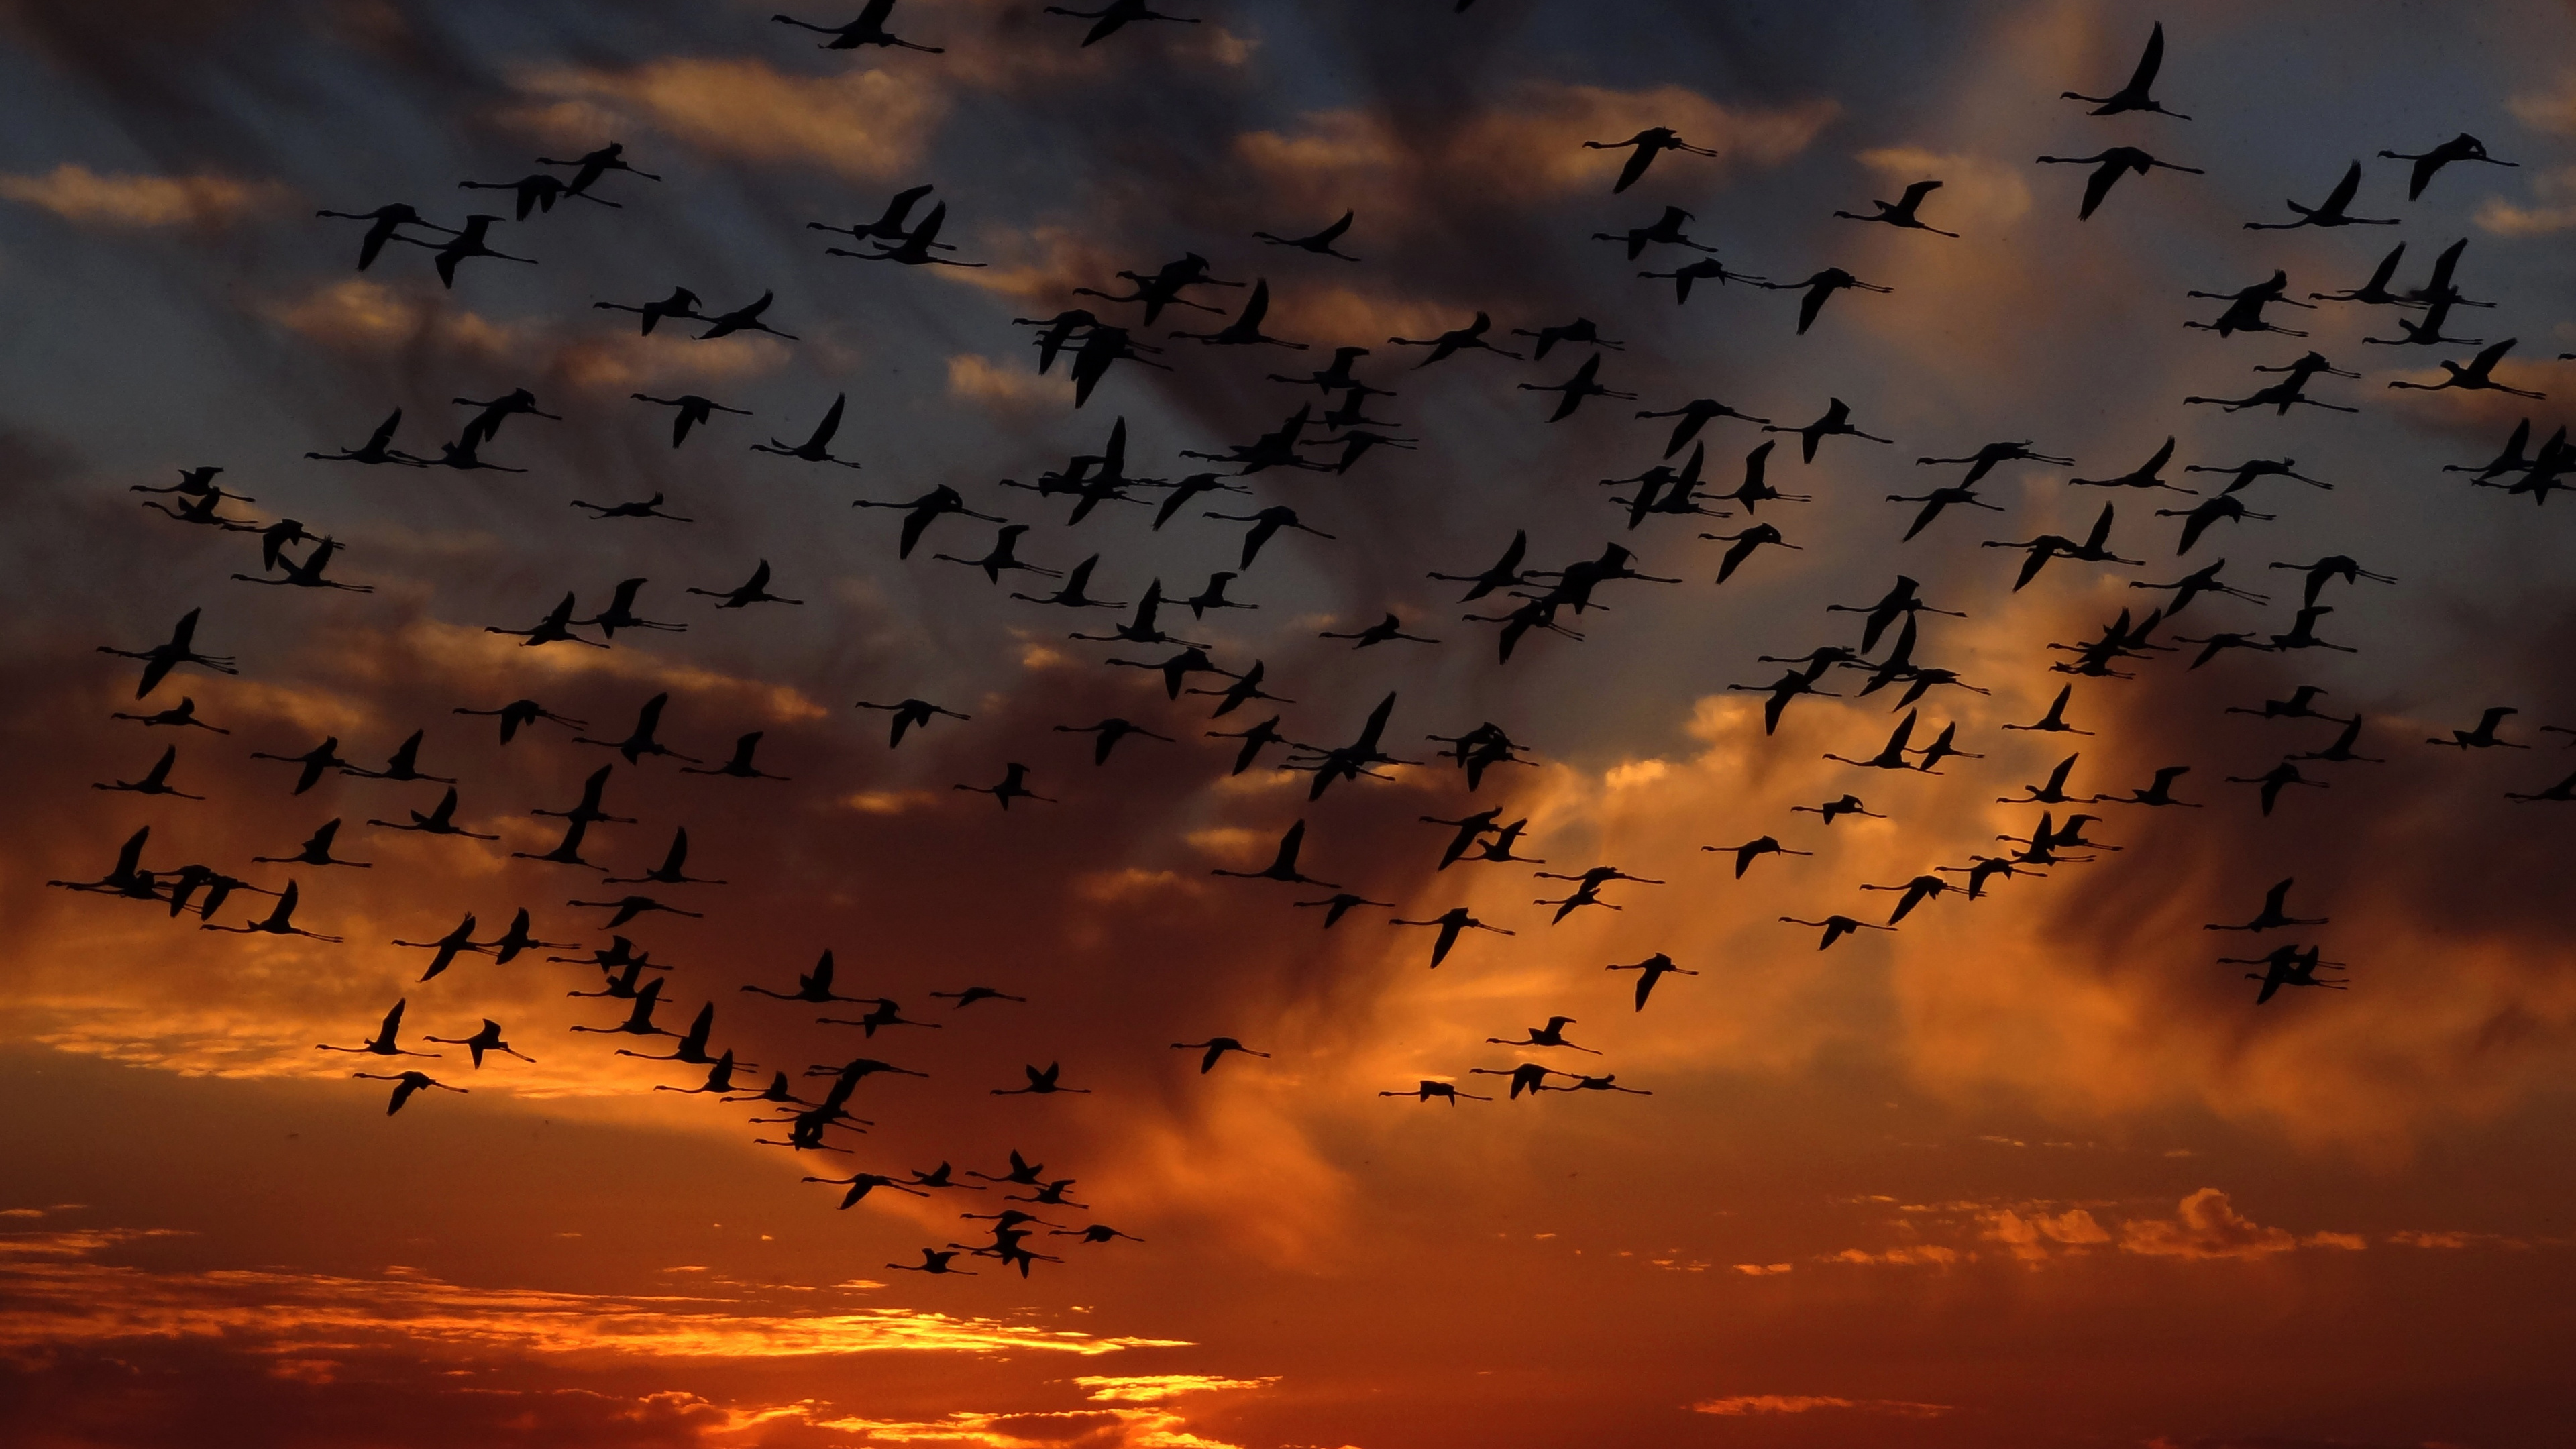 Silhouette of Flock of Birds Flying During Sunset. Wallpaper in 3840x2160 Resolution